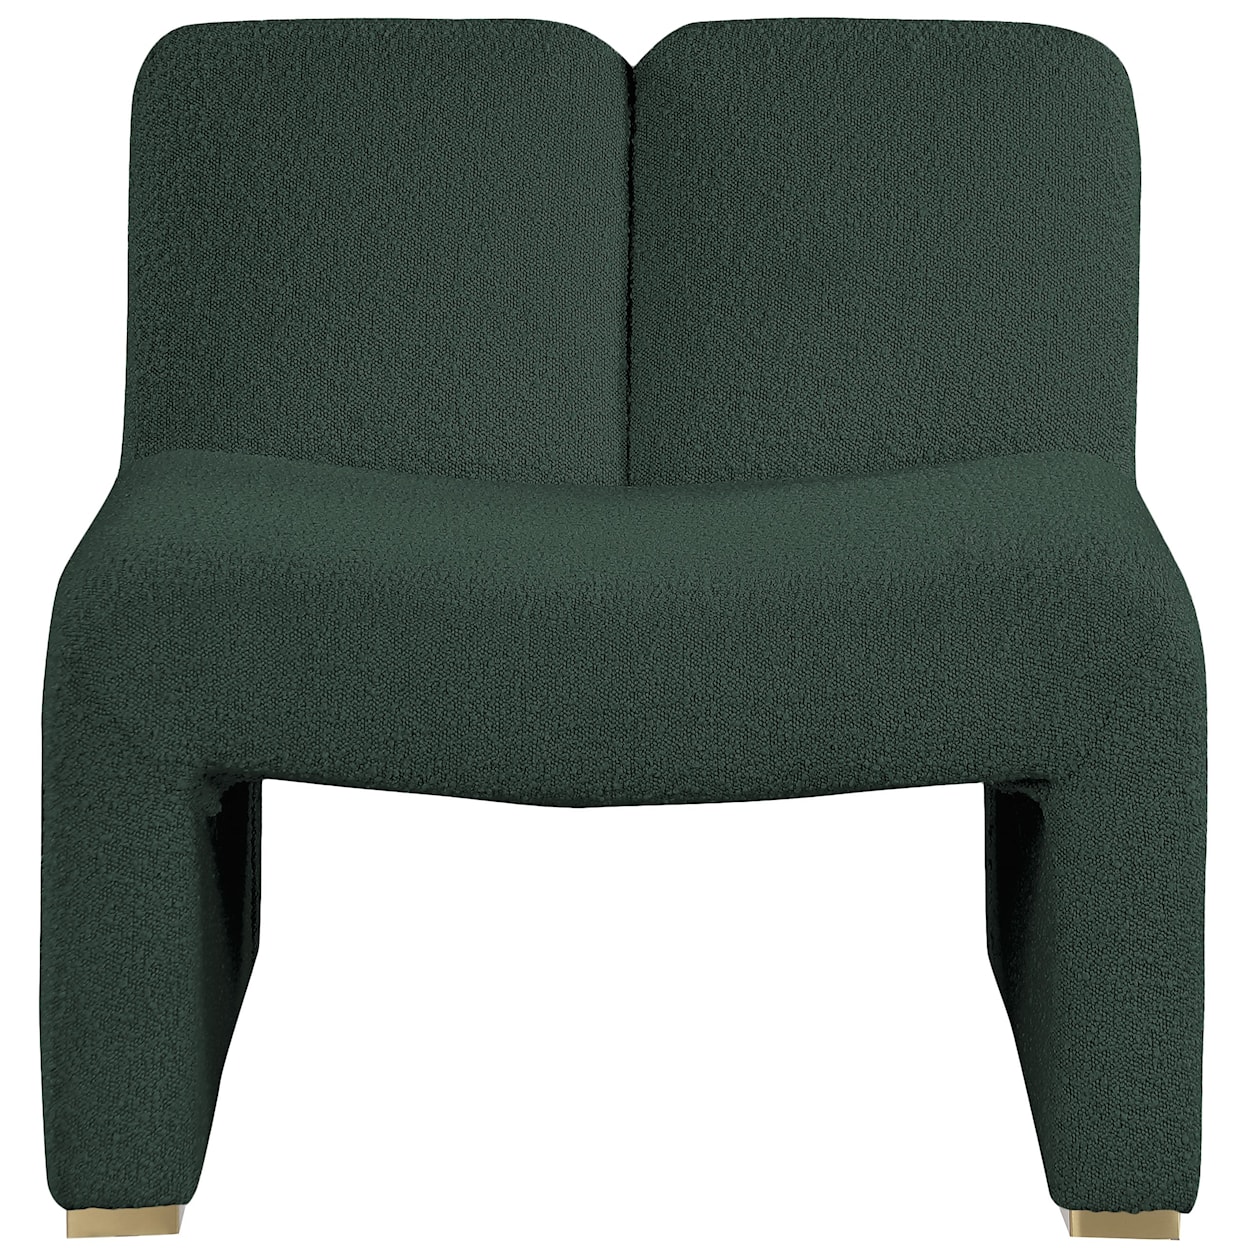 Meridian Furniture Alta Accent Chair